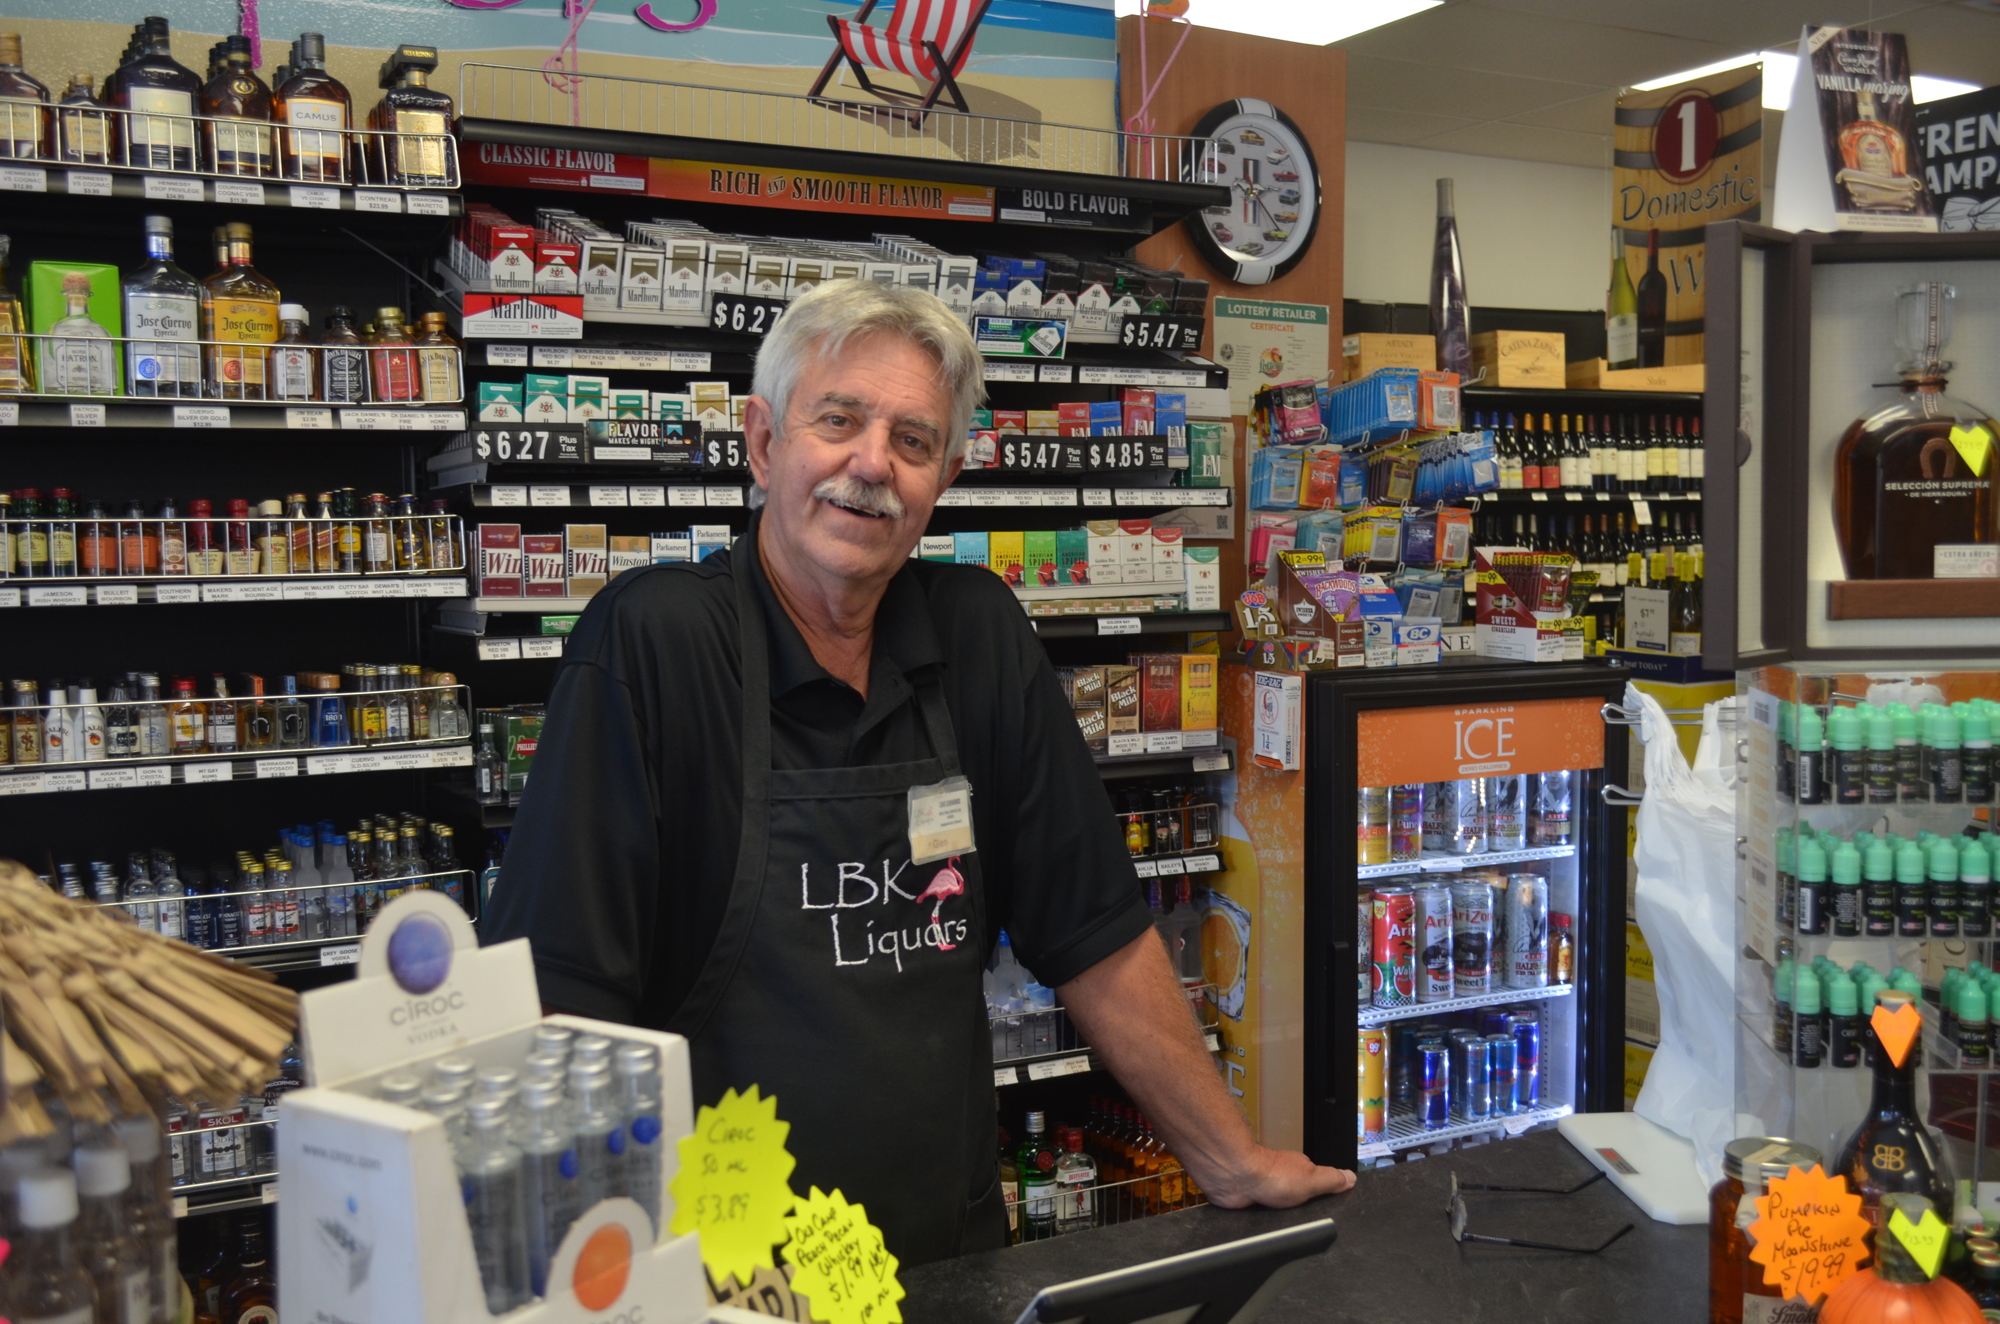 Glen Schloneger, proprietor of LBK Liquors at 6854 Gulf of Mexico Drive, is Snyder’s stepfather. He said his business, which opened in 2014, would be reshaped by the referendum.